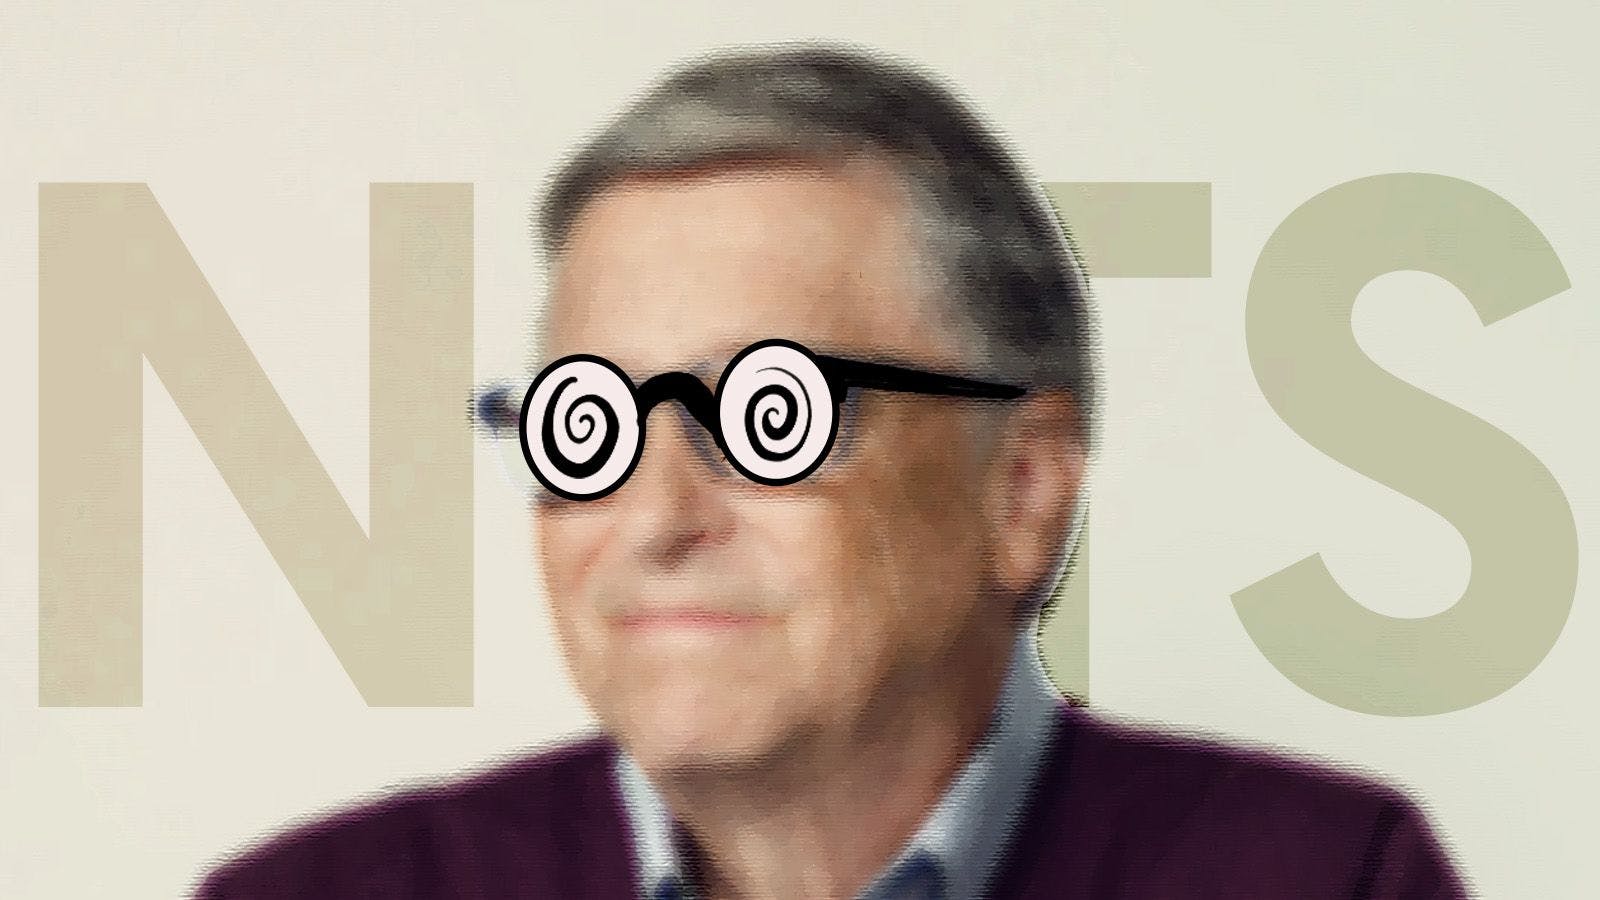 What If Bill Gates is Shortsighted?